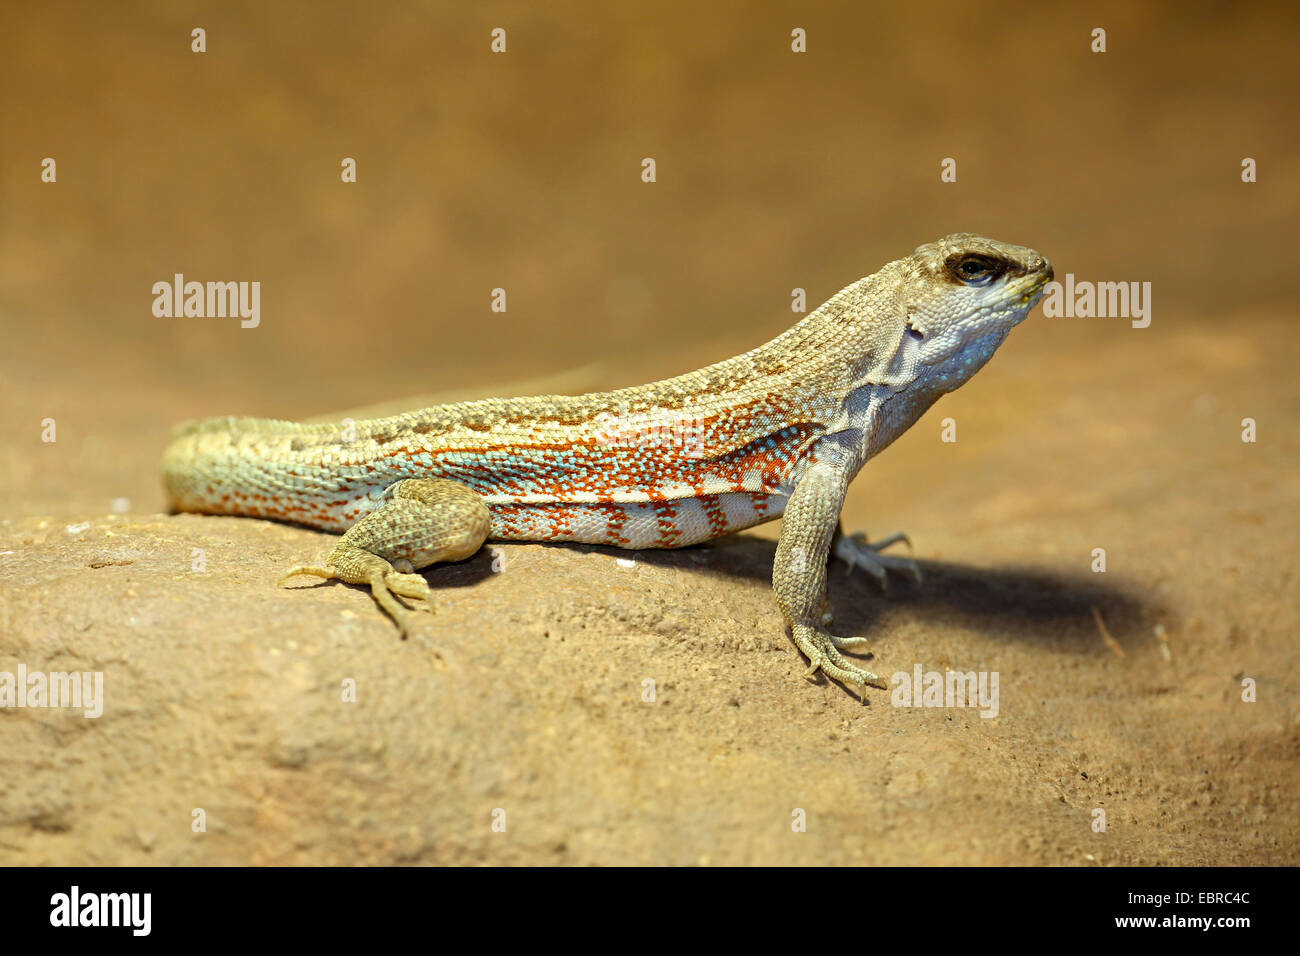 Red-sided curlytail lizard, Haitian curly-tail (Leiocephalus schreibersii), on a stone Stock Photo